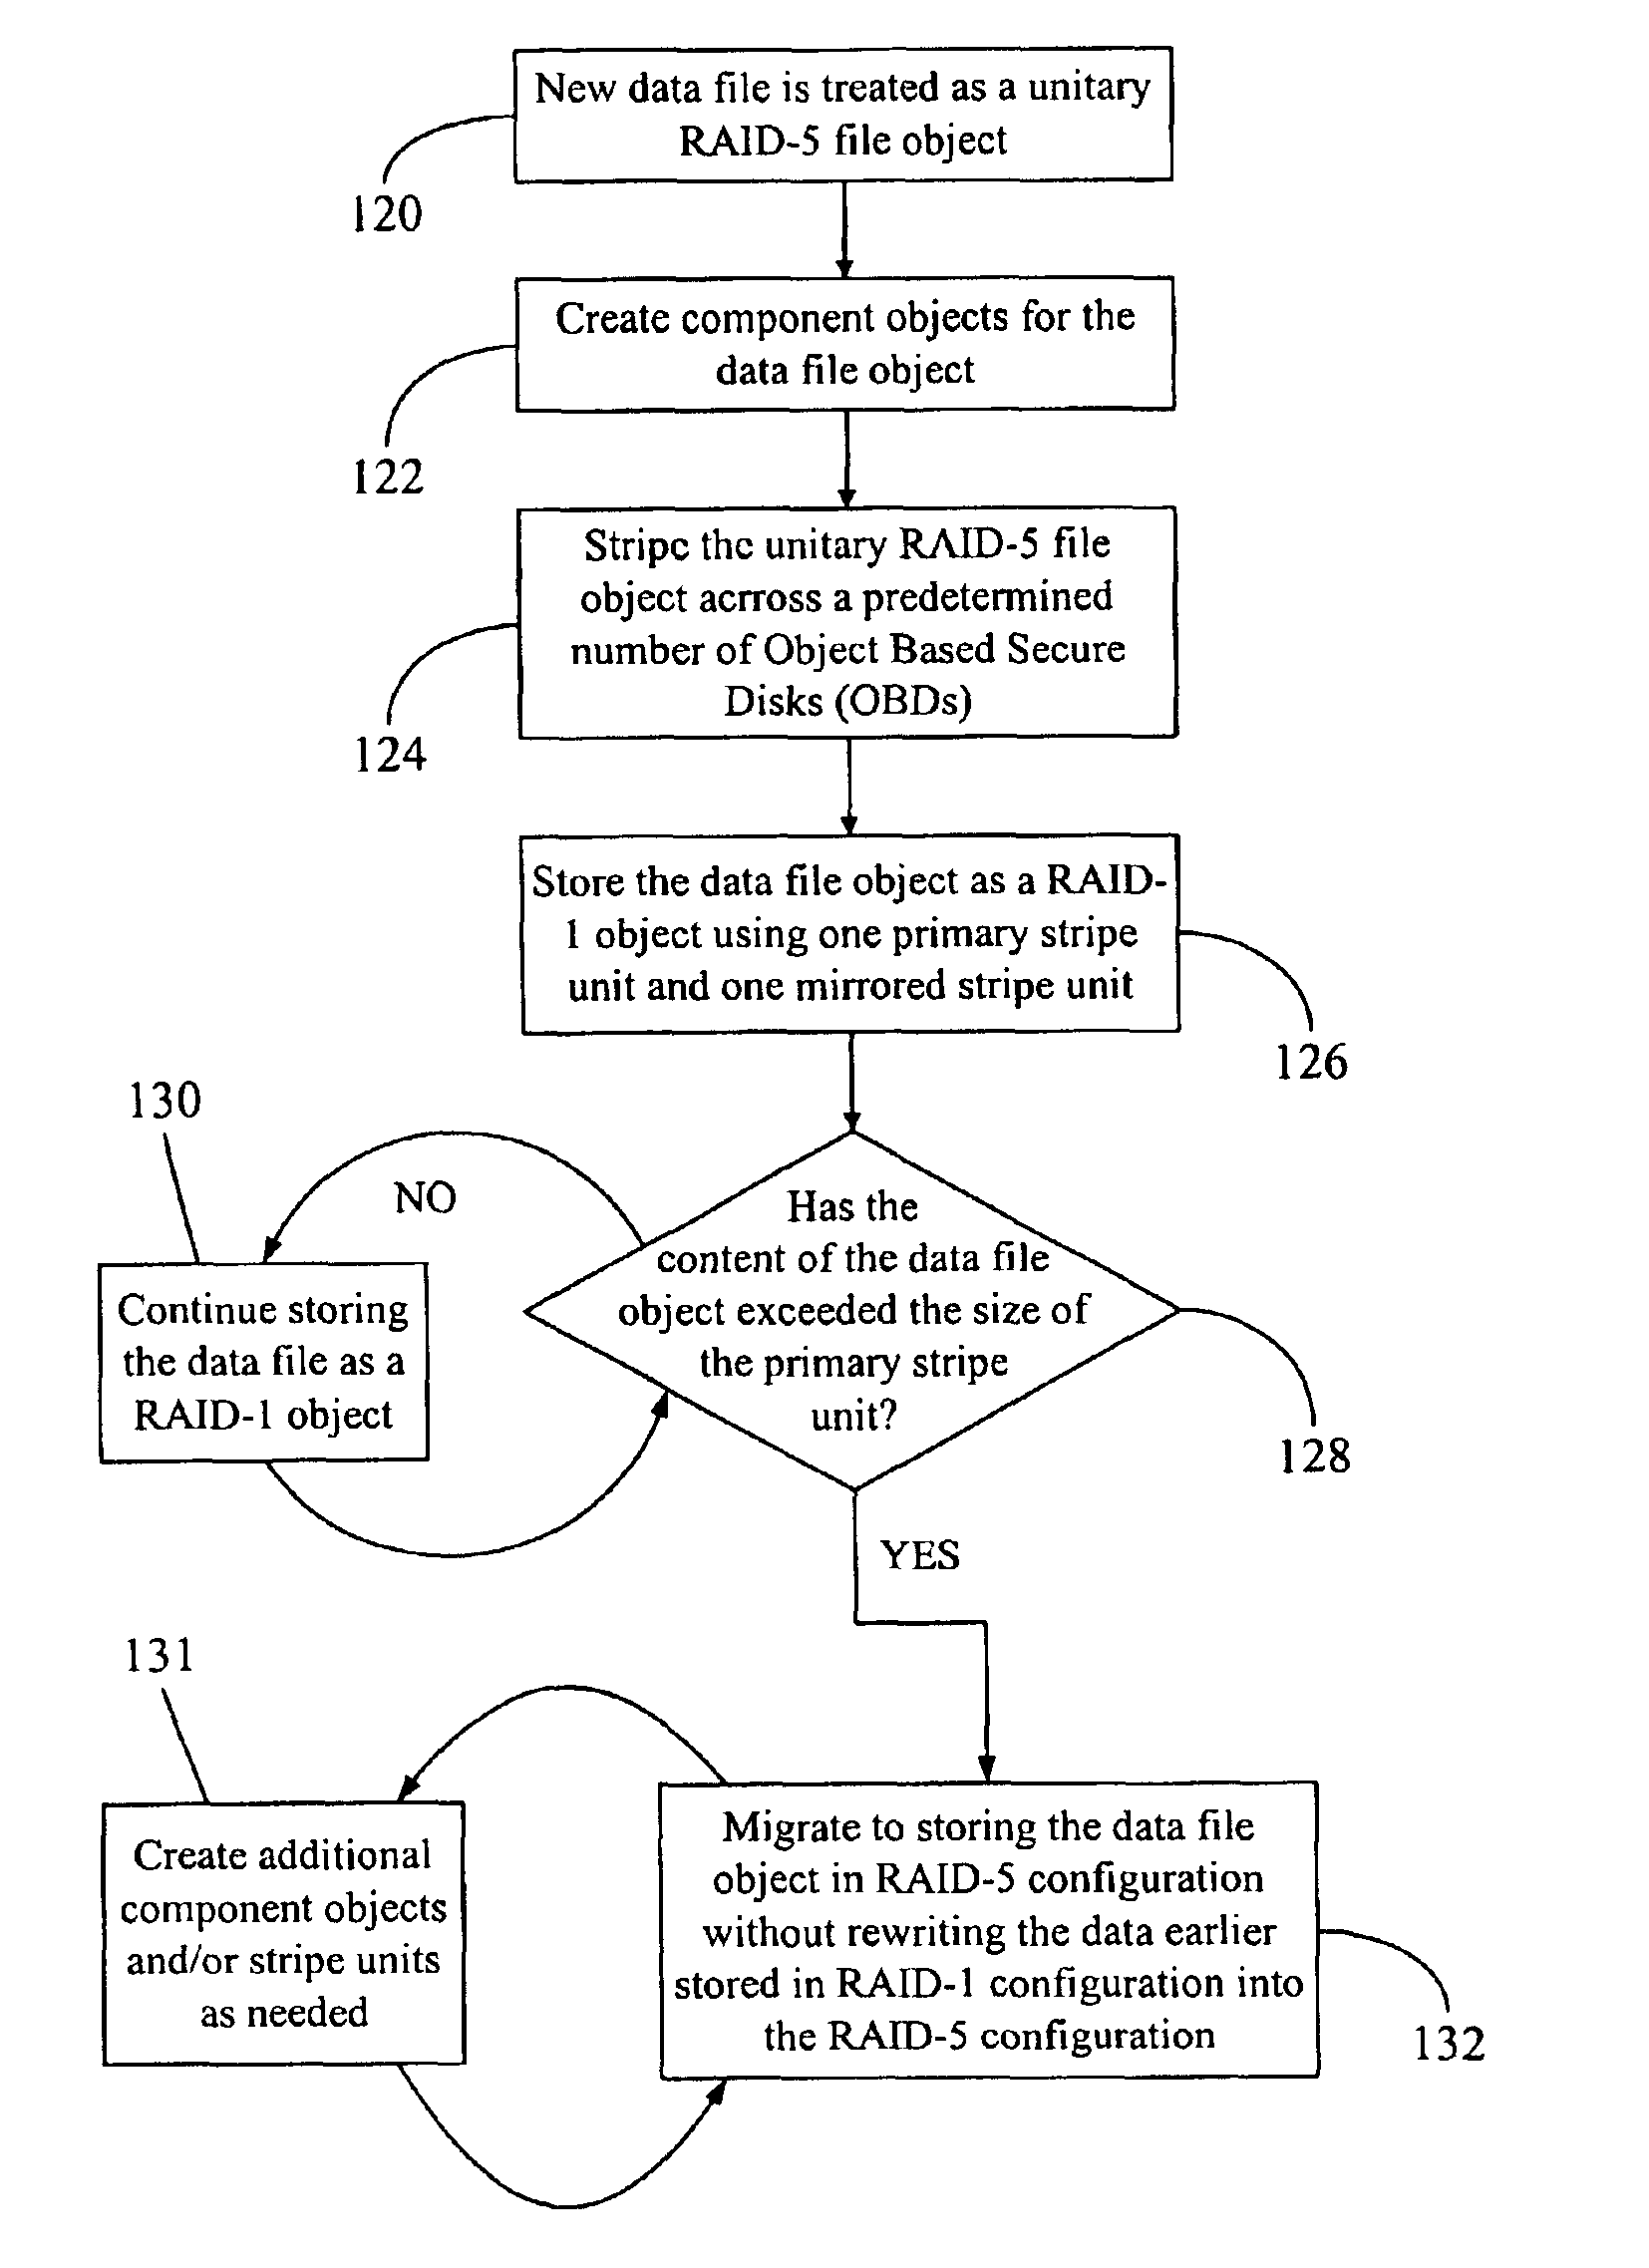 Data file migration from a mirrored RAID to a non-mirrored XOR-based RAID without rewriting the data